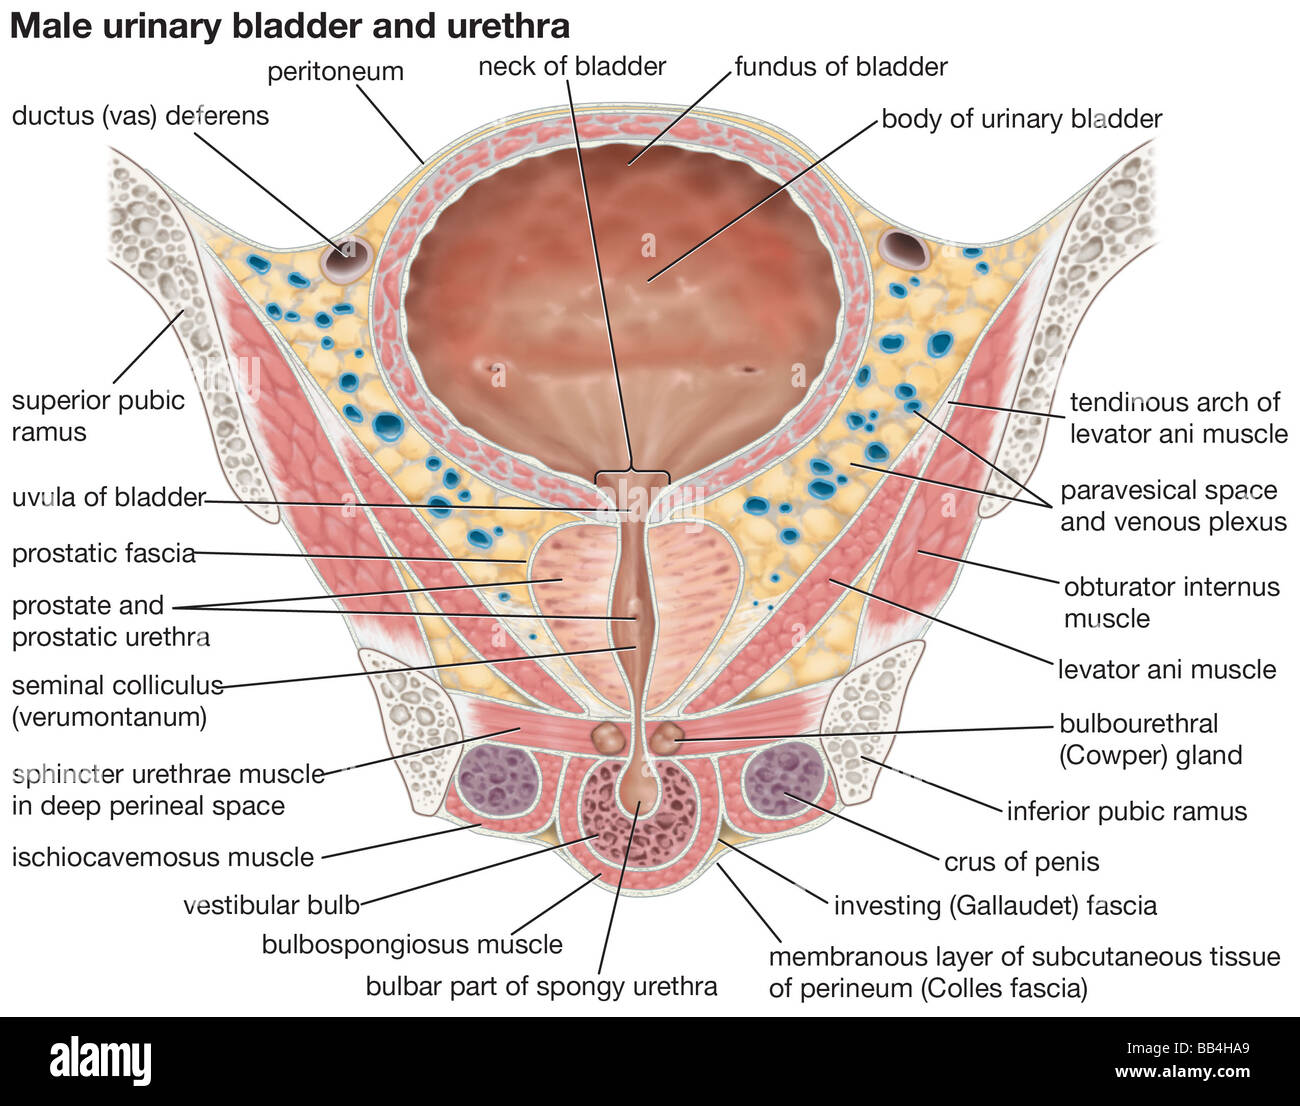 The human male urinary bladder and urethra. Stock Photo